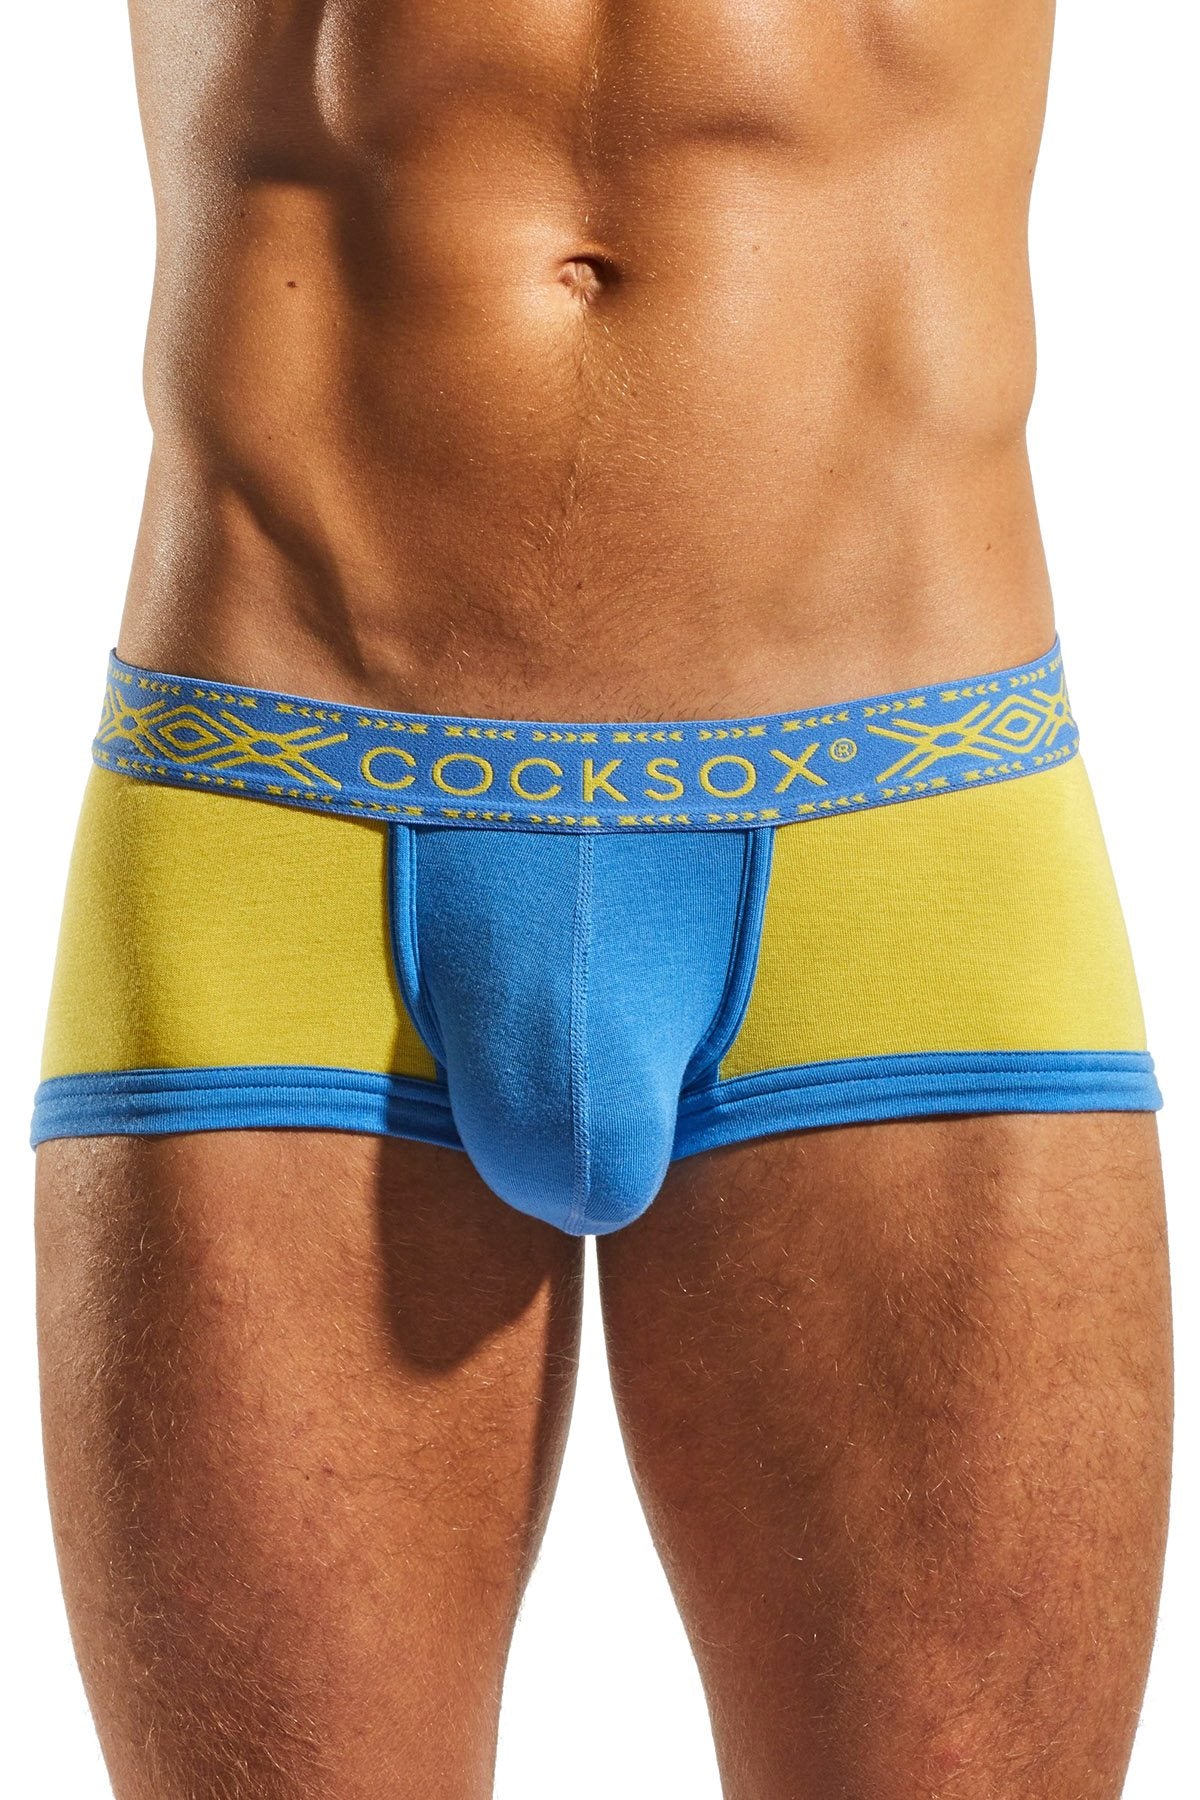 Cocksox Woad Modal Enhancing Pouch Norse Trunk